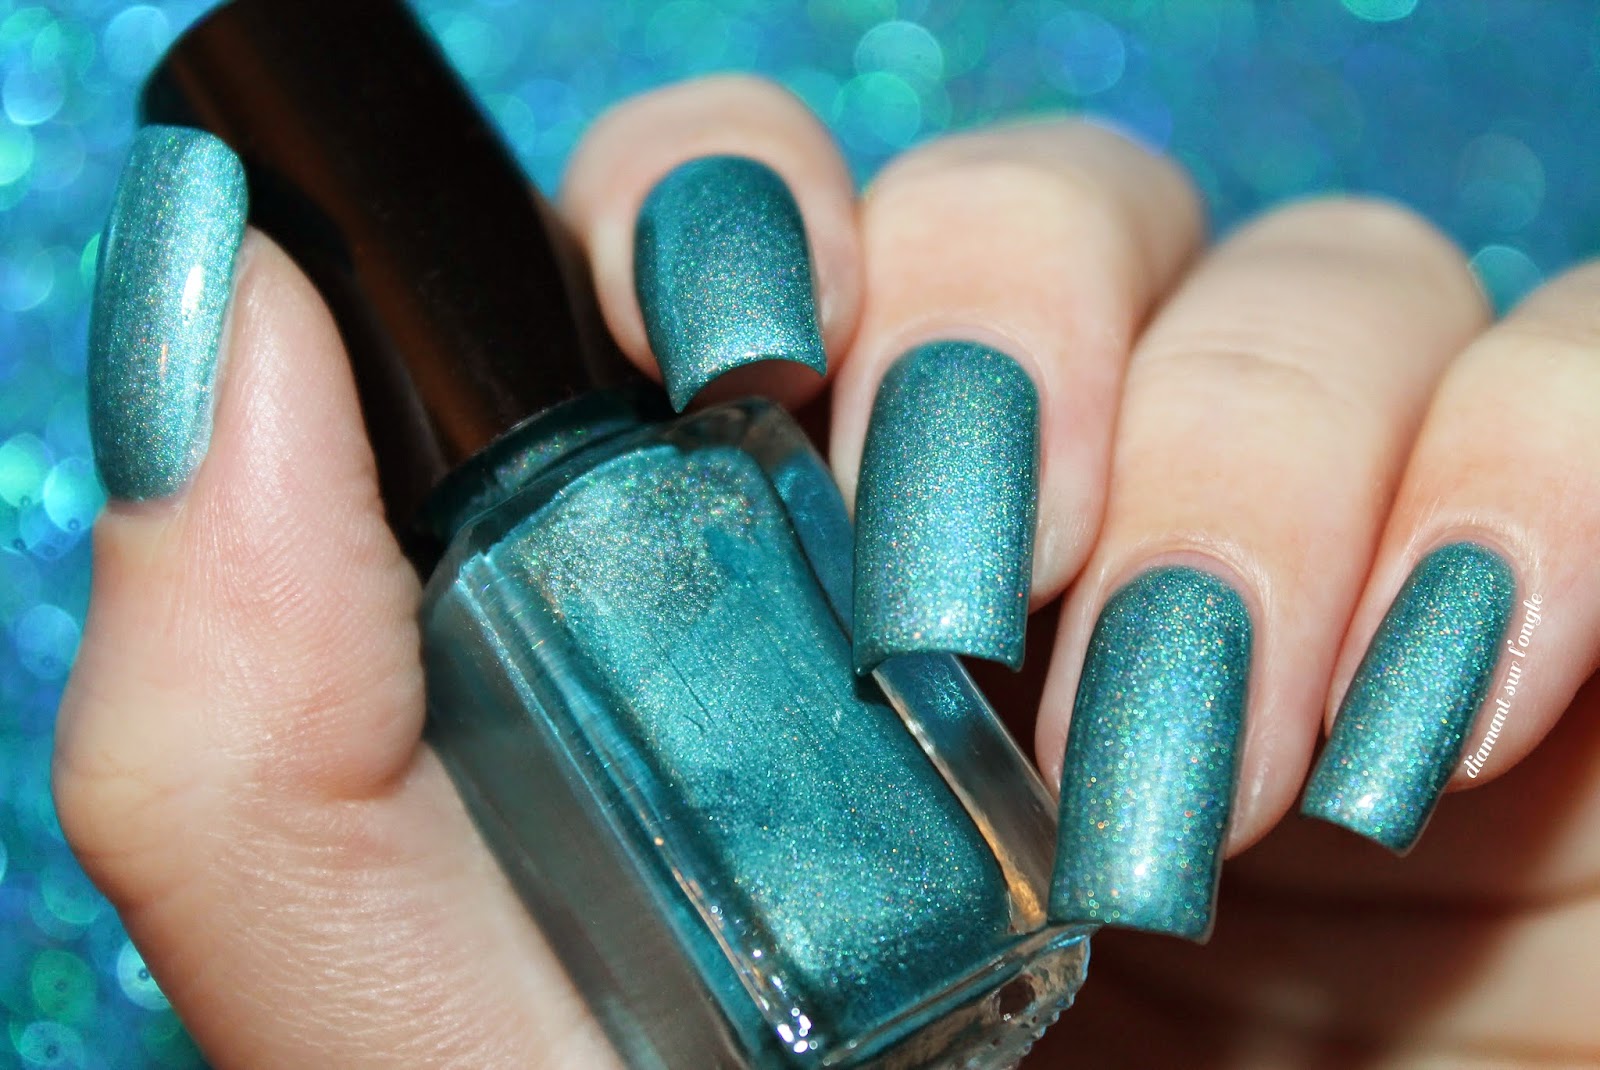 Swatch of a teal holographic franken nail polish